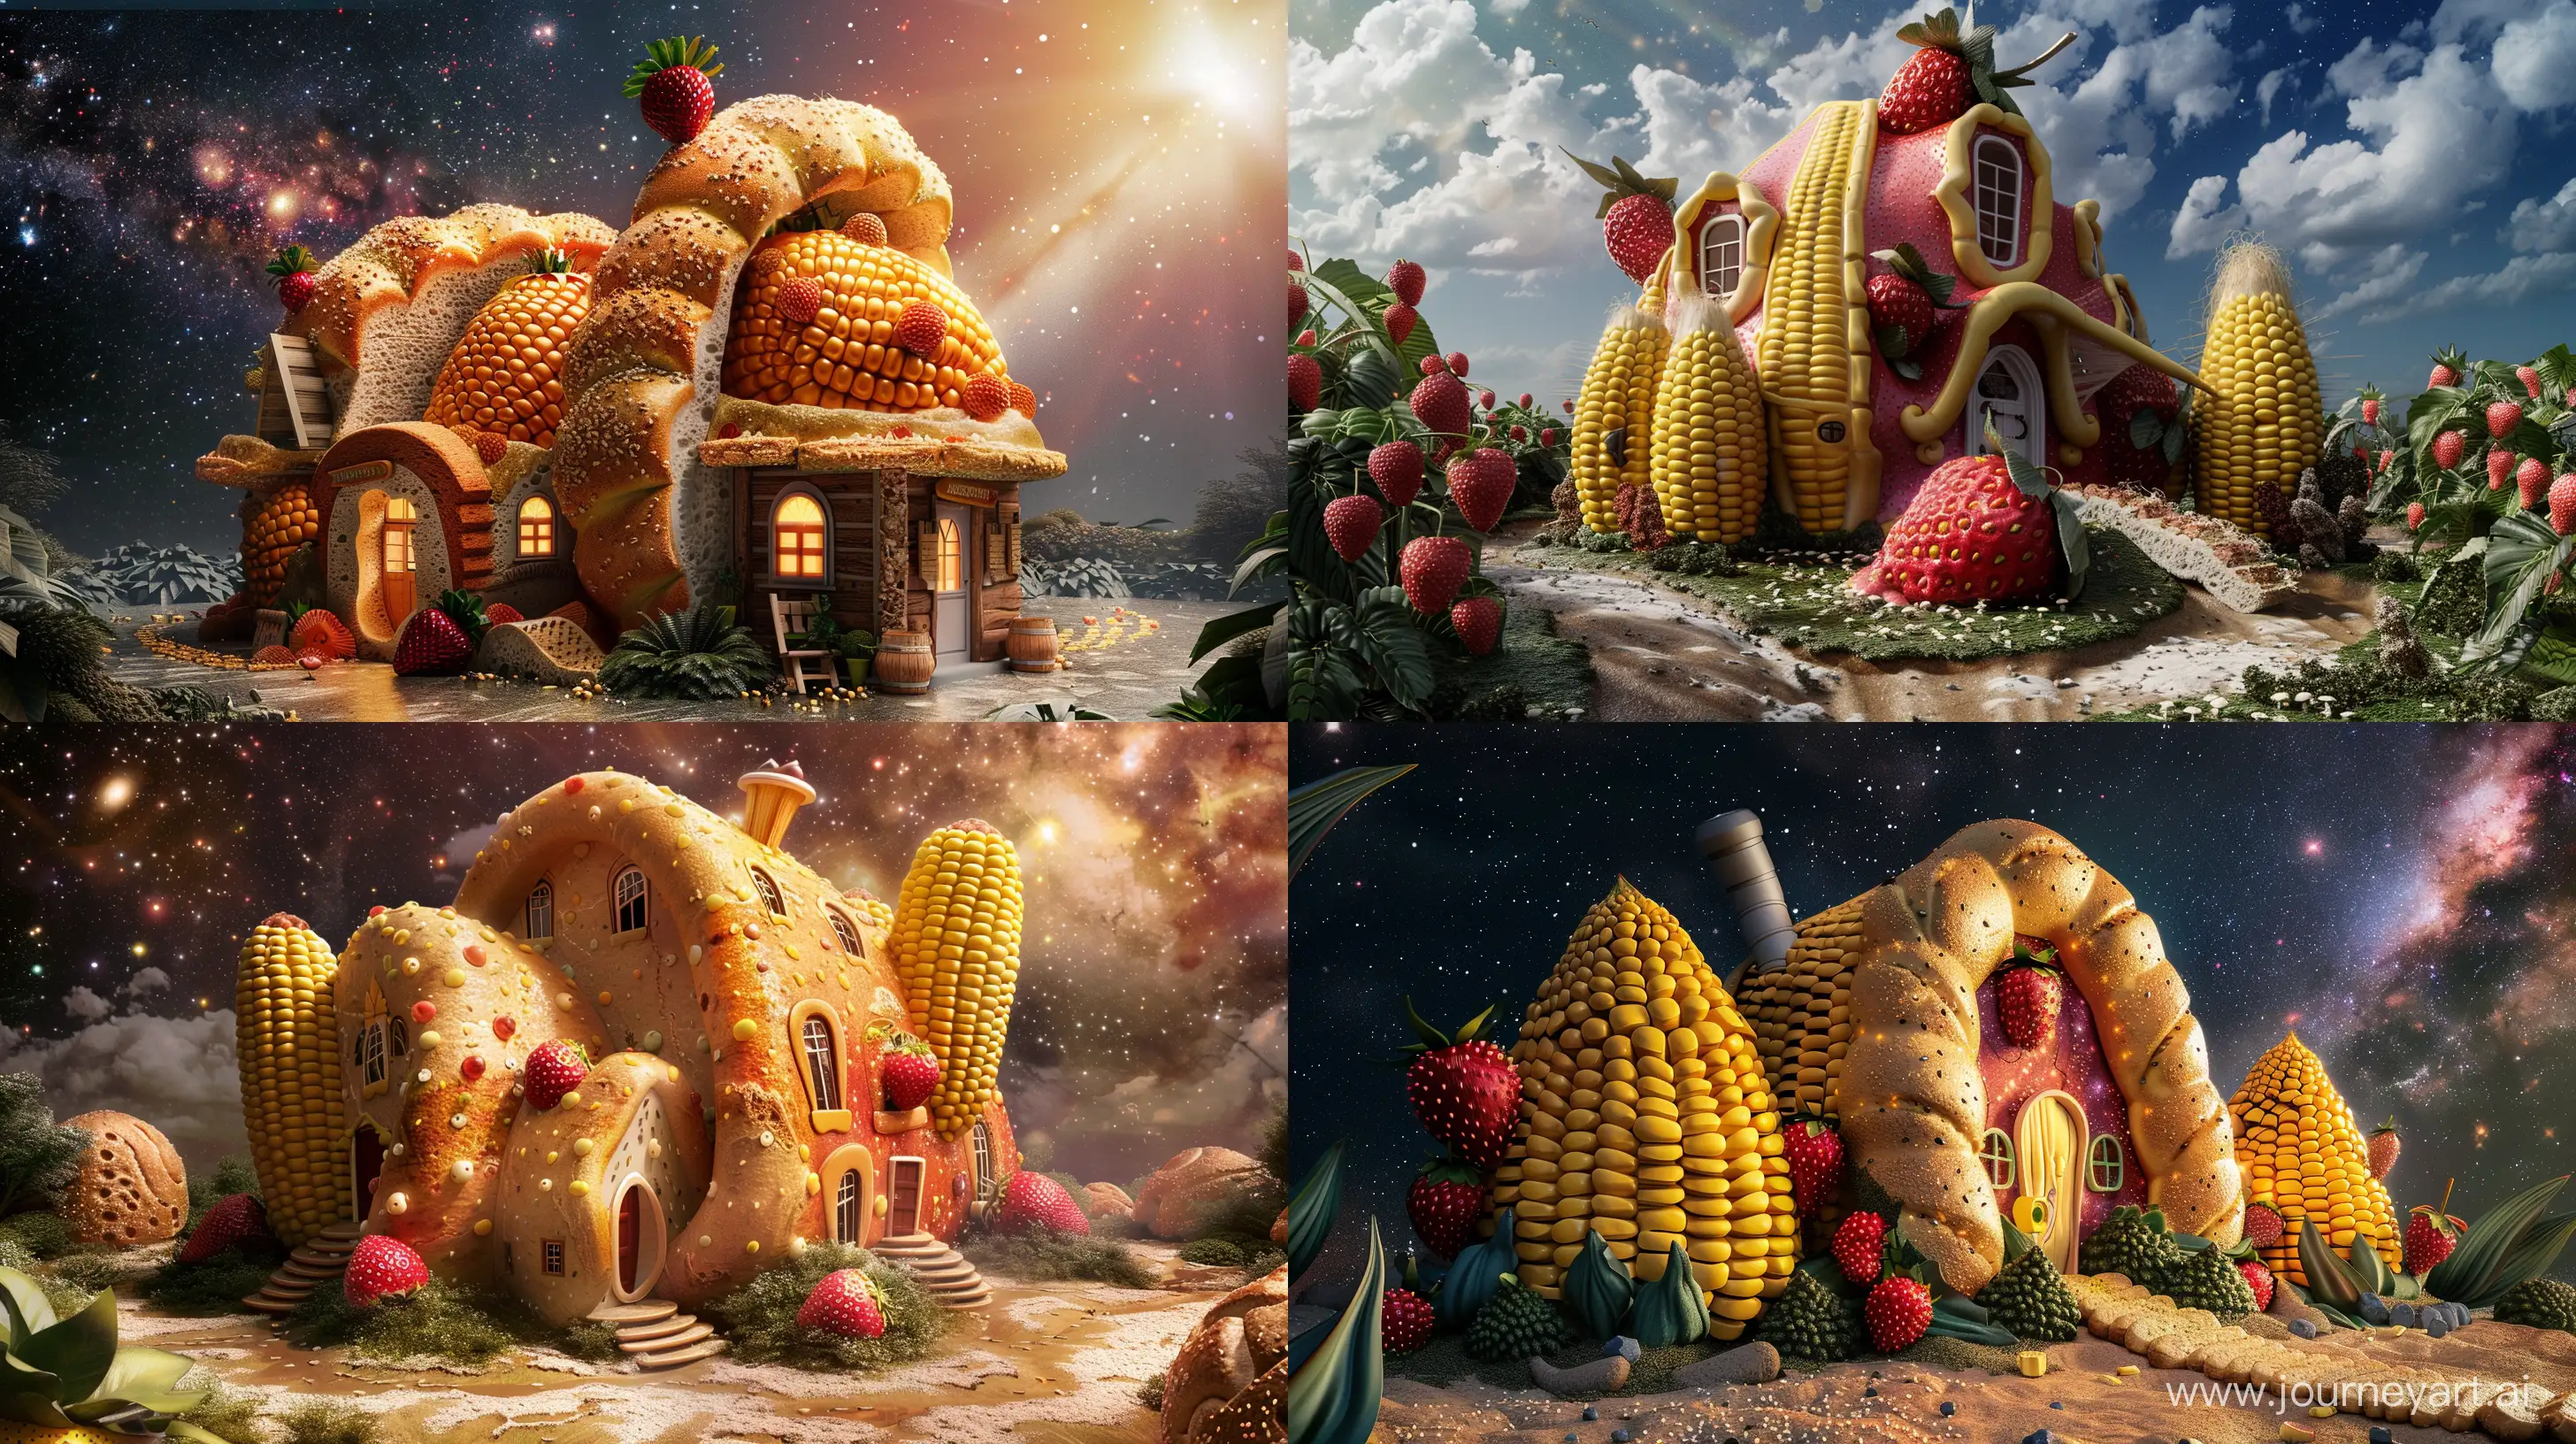 Fantasy-Luxury-House-Corn-Bread-and-Strawberry-Mansion-in-the-Galaxy